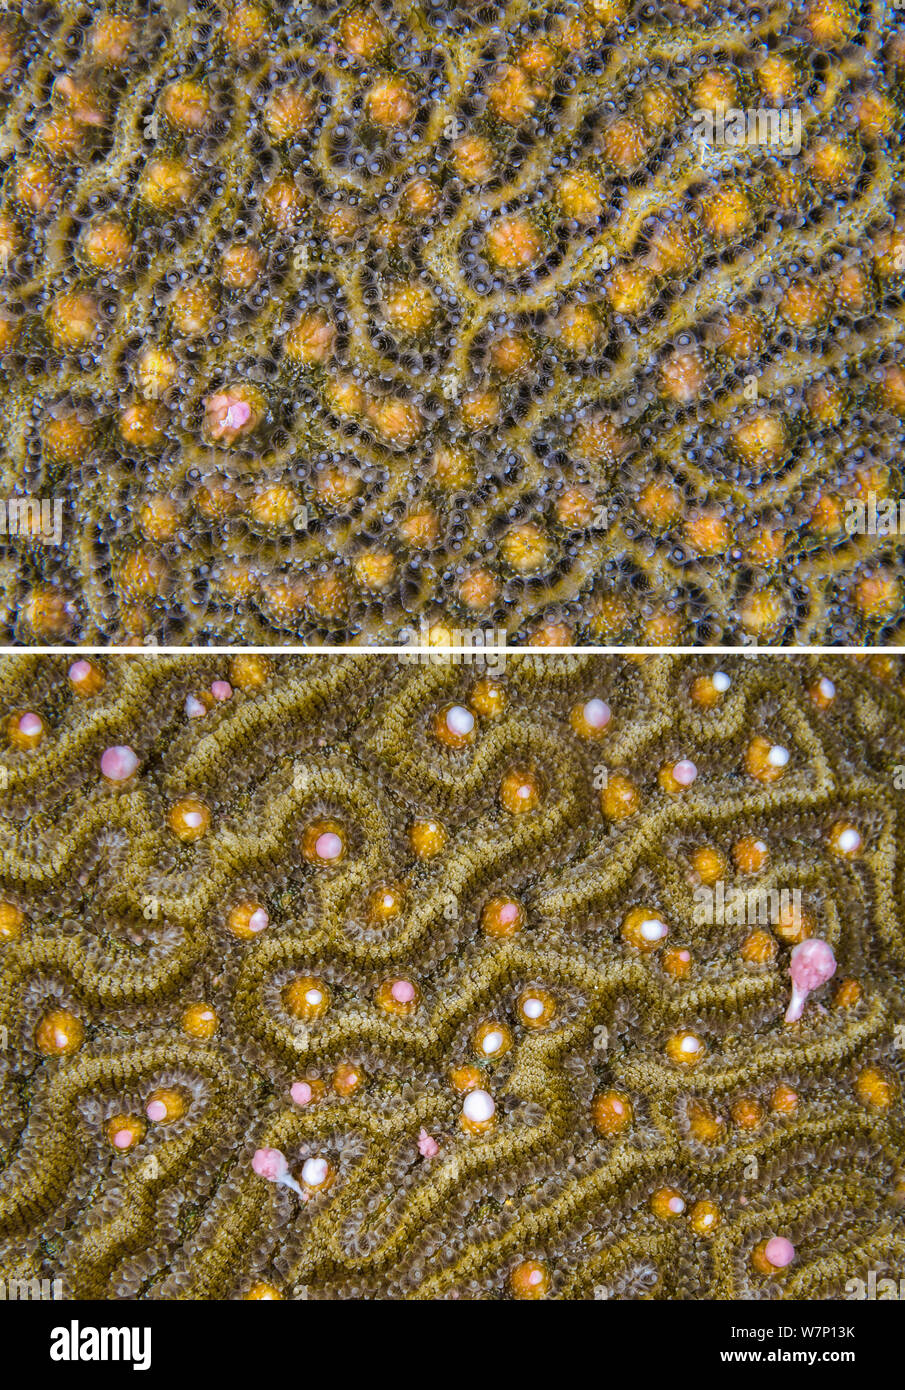 Two photos of a Symmeterical brain coral (Diploria strigosa) spawning at night, showing views before and during the release of the gamete bundles, East End, Grand Cayman, Cayman Islands, British West Indies, Caribbean Sea. Stock Photo